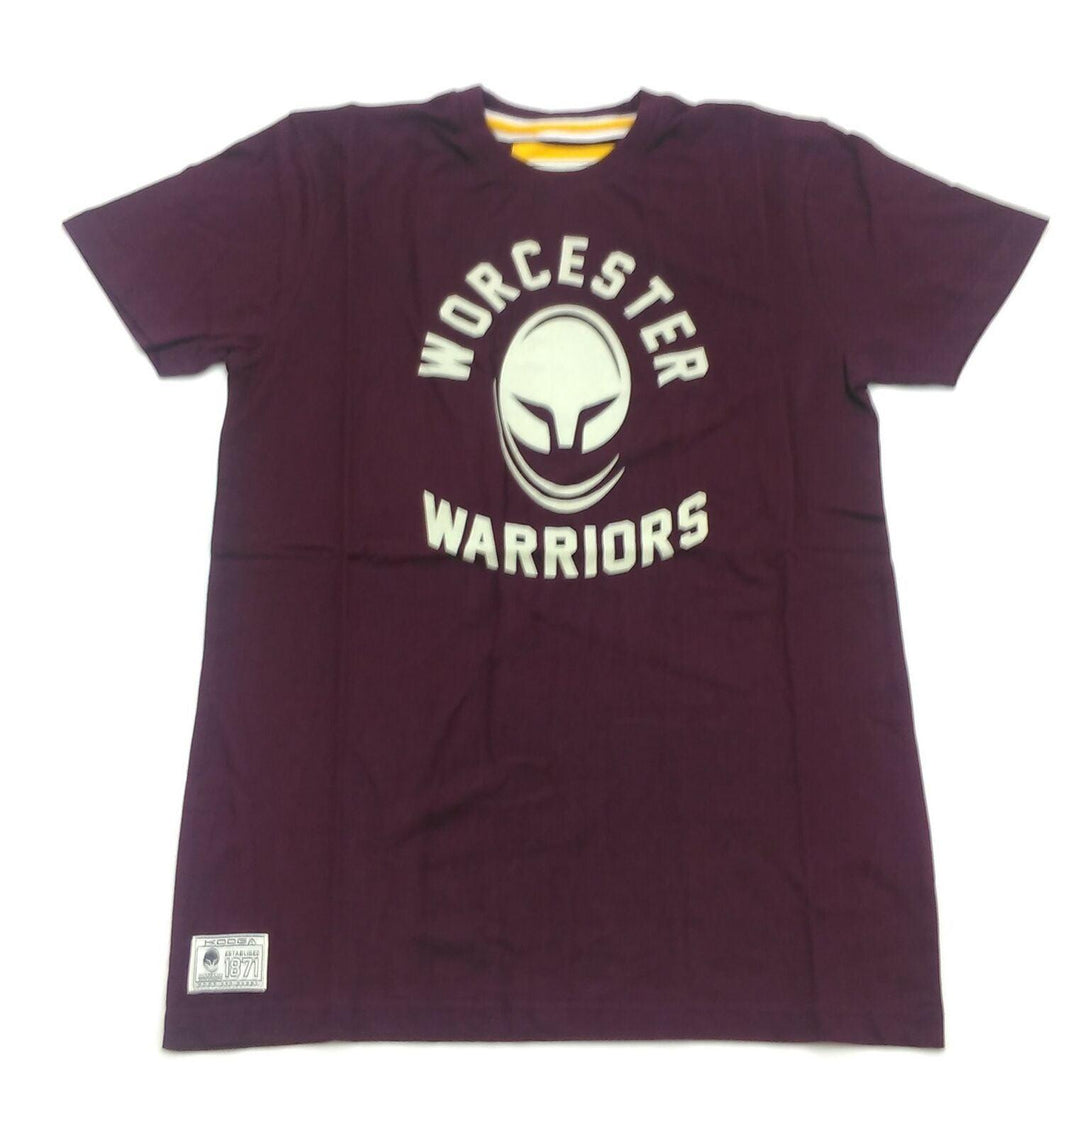 Rugby Heaven Kooga Worcester Warriors Graphic T-Shirt - www.rugby-heaven.co.uk